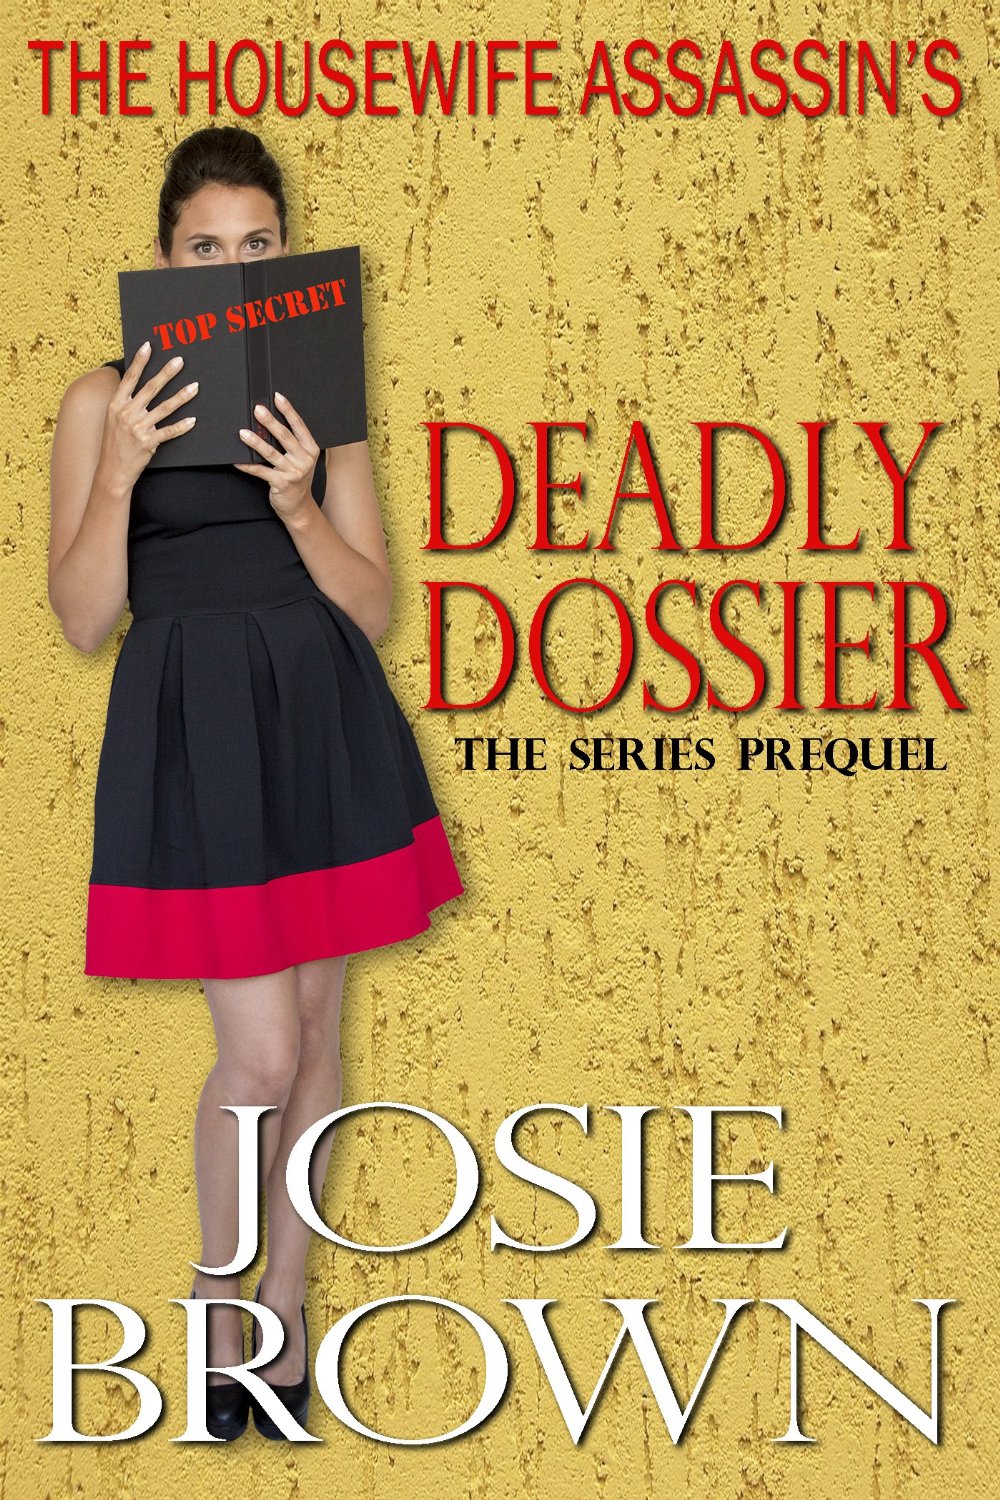 The Housewife Assassin’s Deadly Dossier: Prequel – The Housewife Assassin Series by Josie Brown